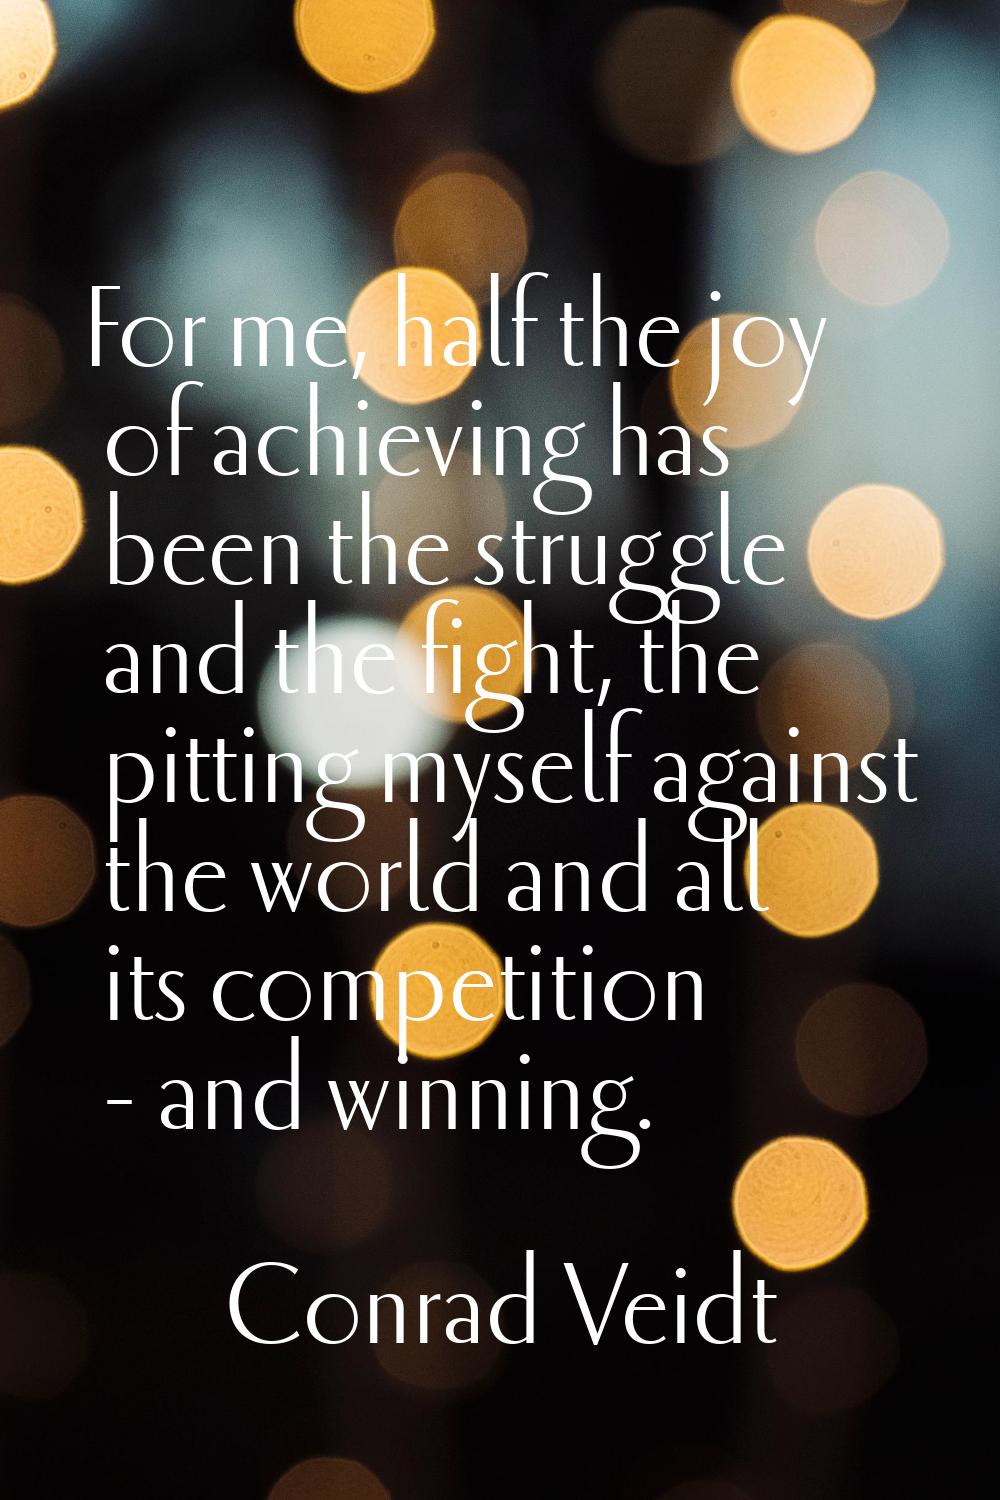 For me, half the joy of achieving has been the struggle and the fight, the pitting myself against t